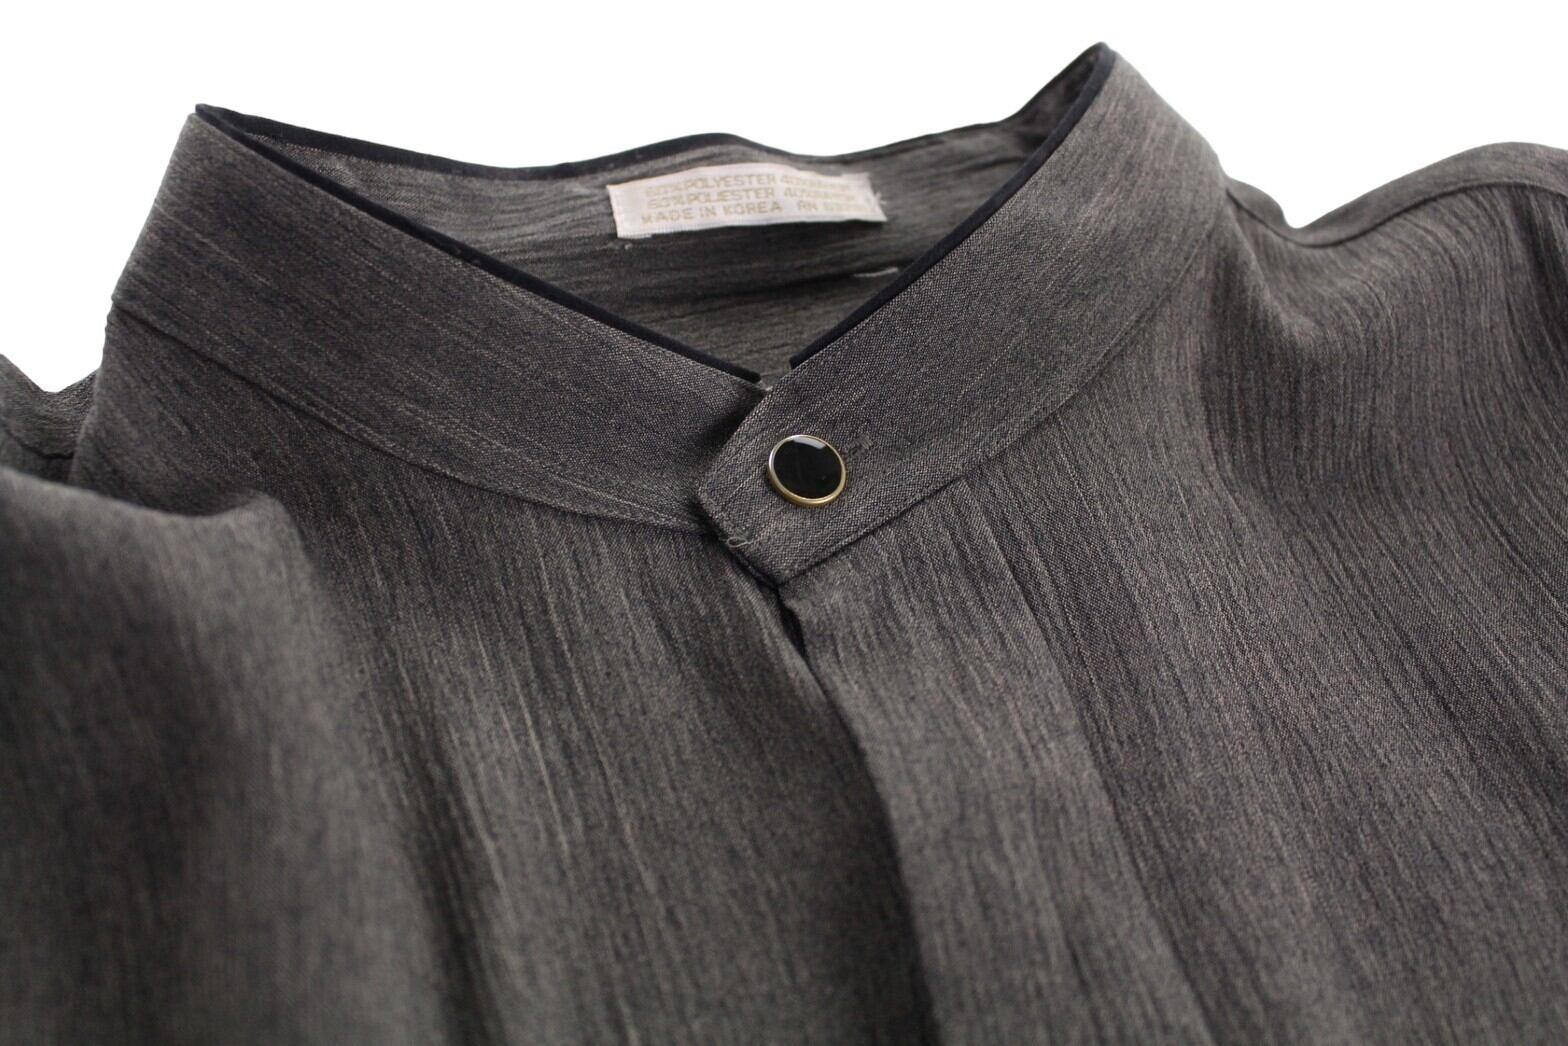 COUOTSU】Washer design front fly design band collar shirt rayon ...